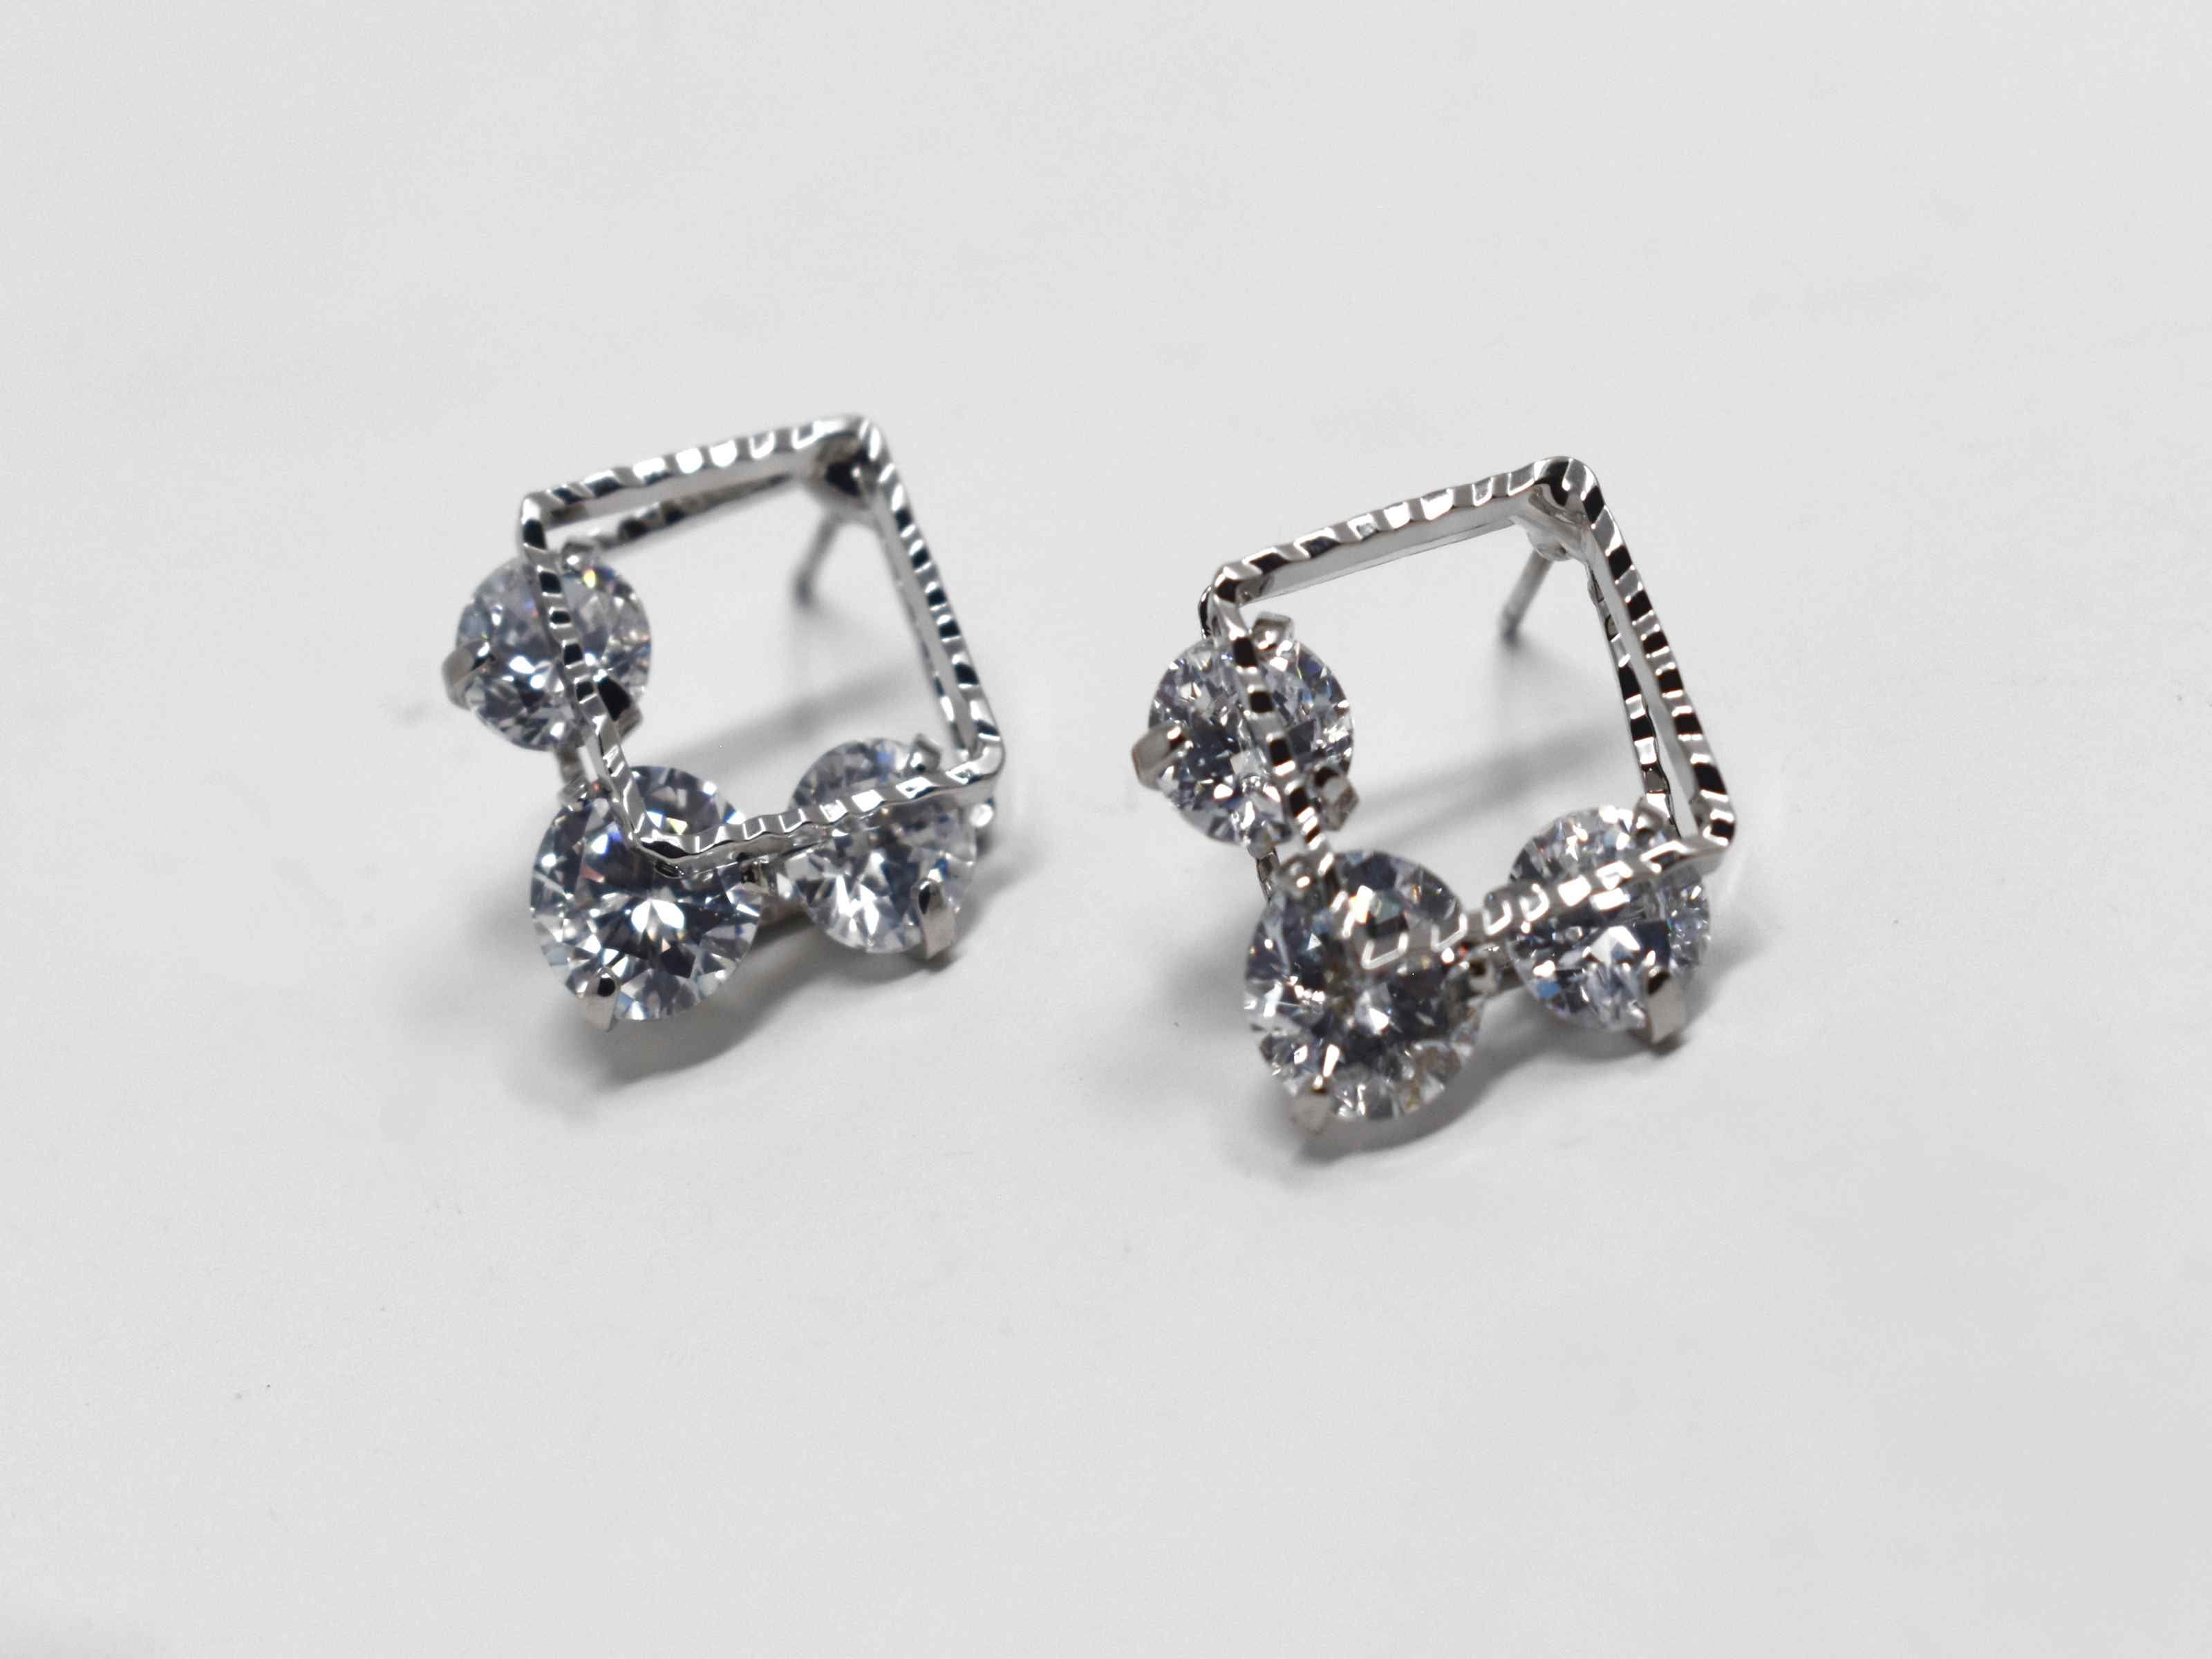 Our beautifully crafted daniella earrings are a must have essential. These silver double square earrings are adorned with stones running between both squares. It is 3/4 of an inch in length with a push back clasp.